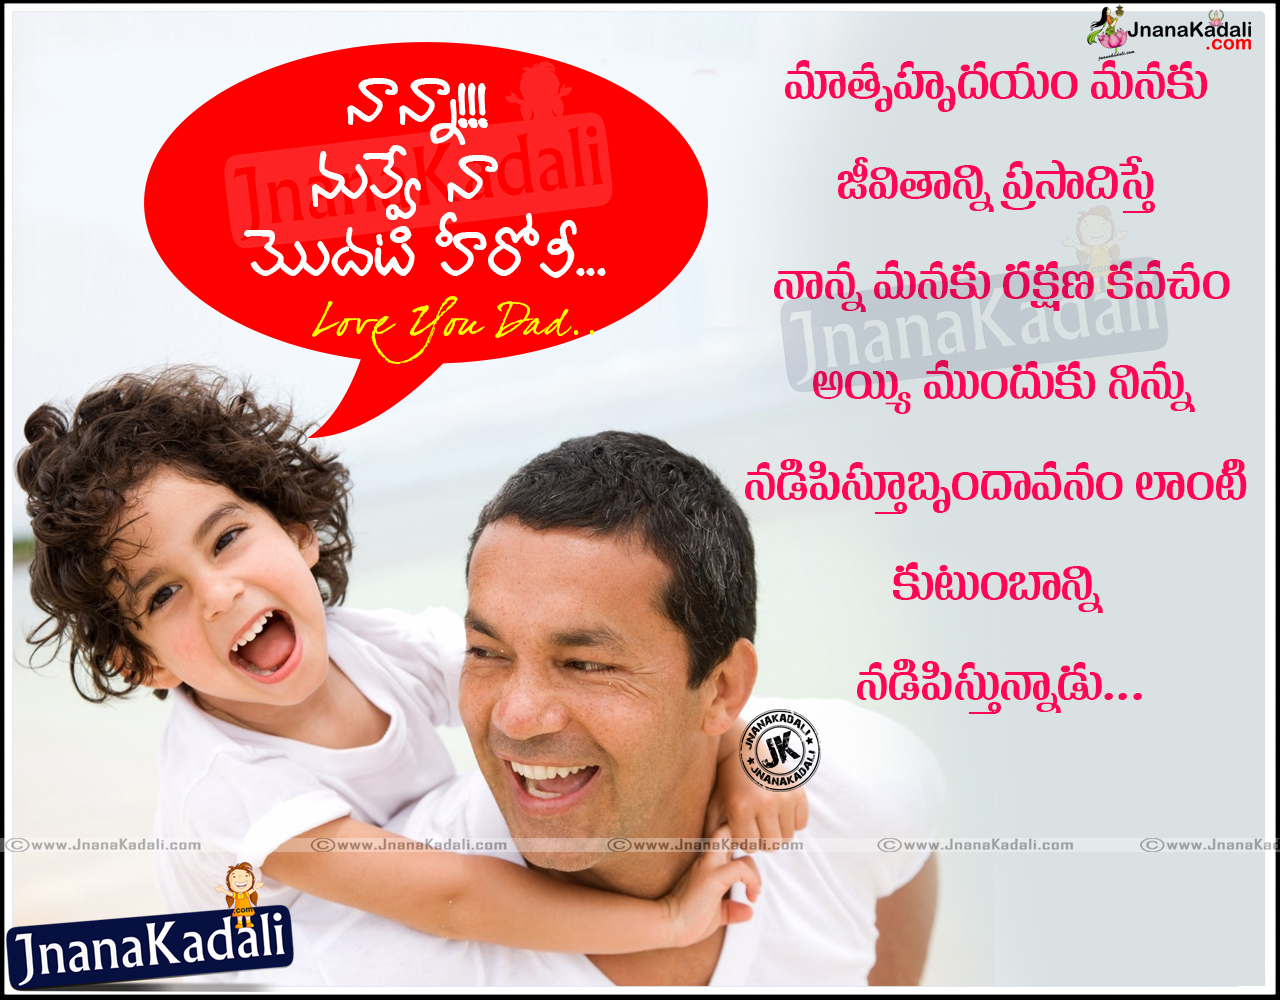 Telugu Father Love Quotes Sayings Images With Father Hd Wallpapers Jnana Kadali Com Telugu Quotes English Quotes Hindi Quotes Tamil Quotes Dharmasandehalu